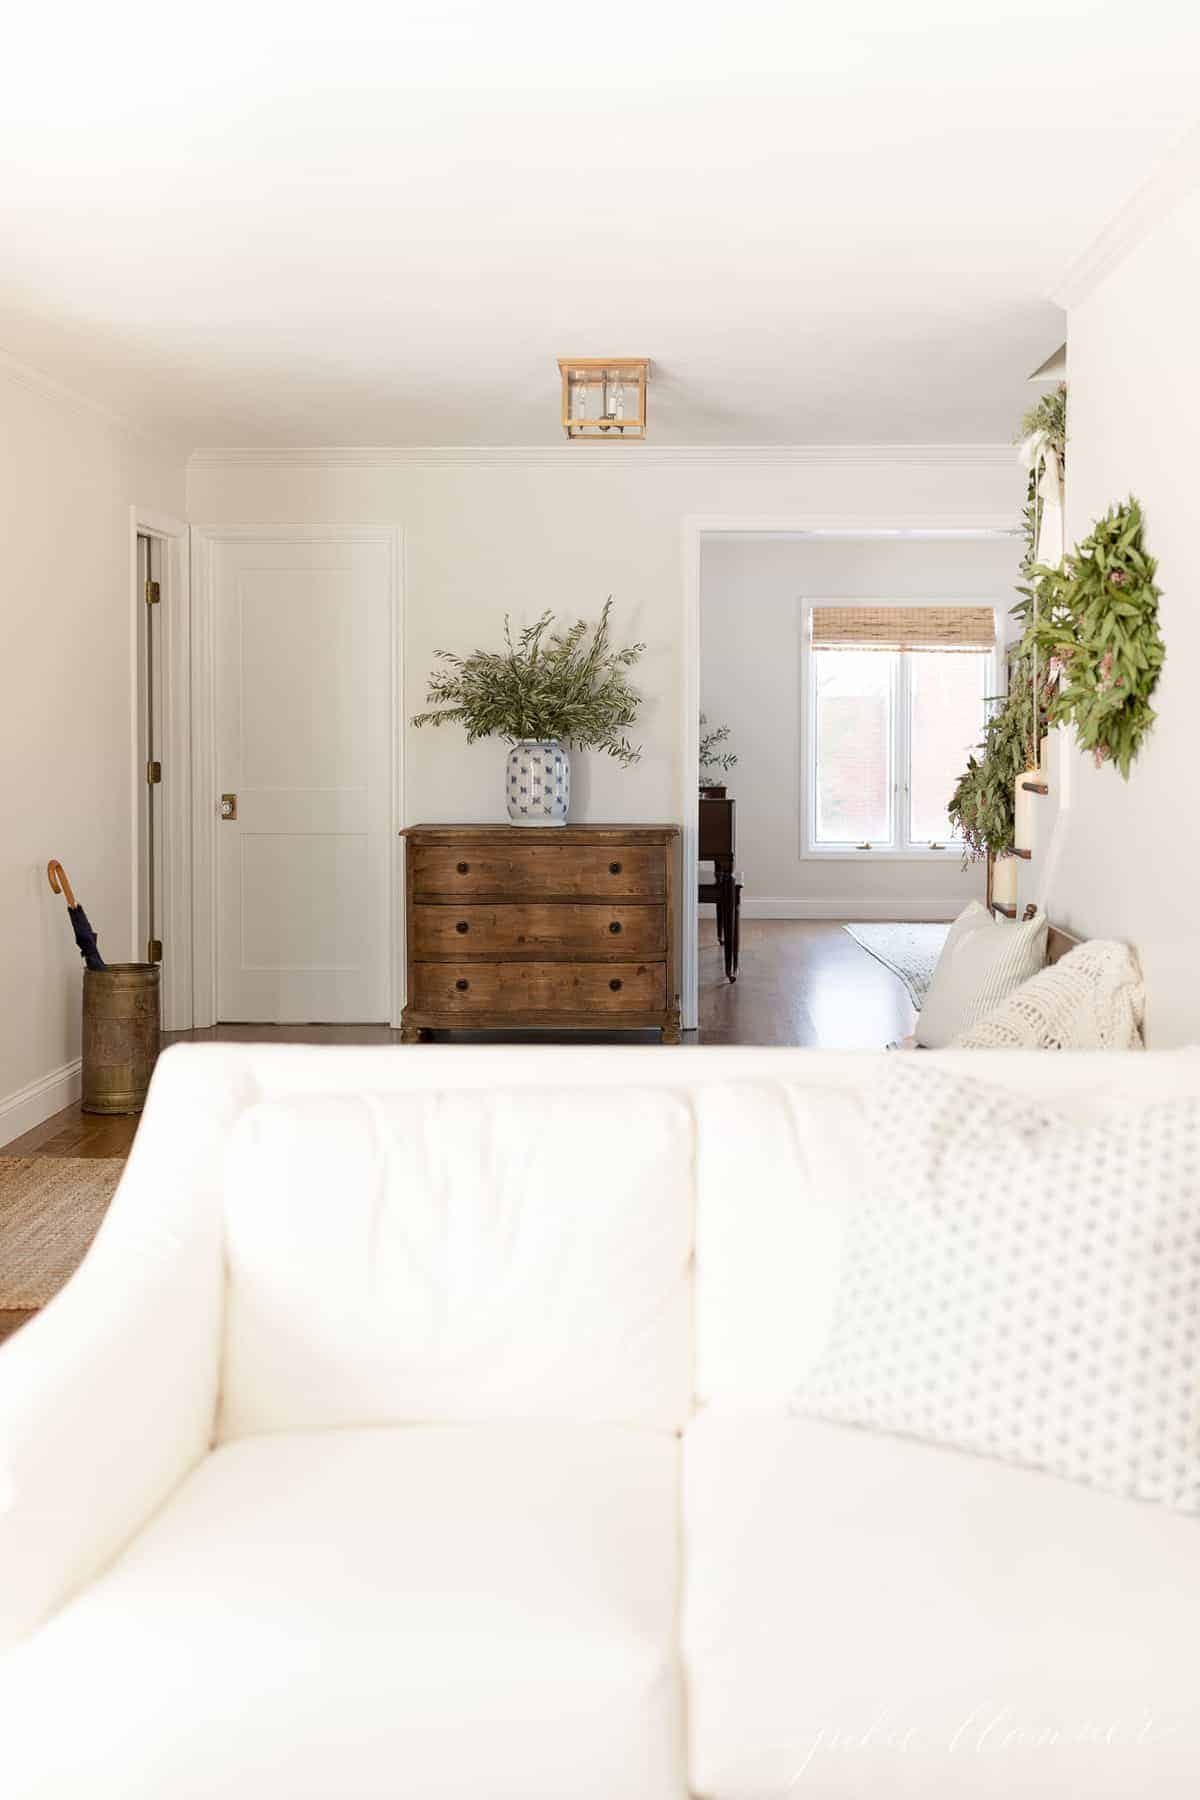 A living room with a white sofa and a Shaker interior door leading to a bathroom.